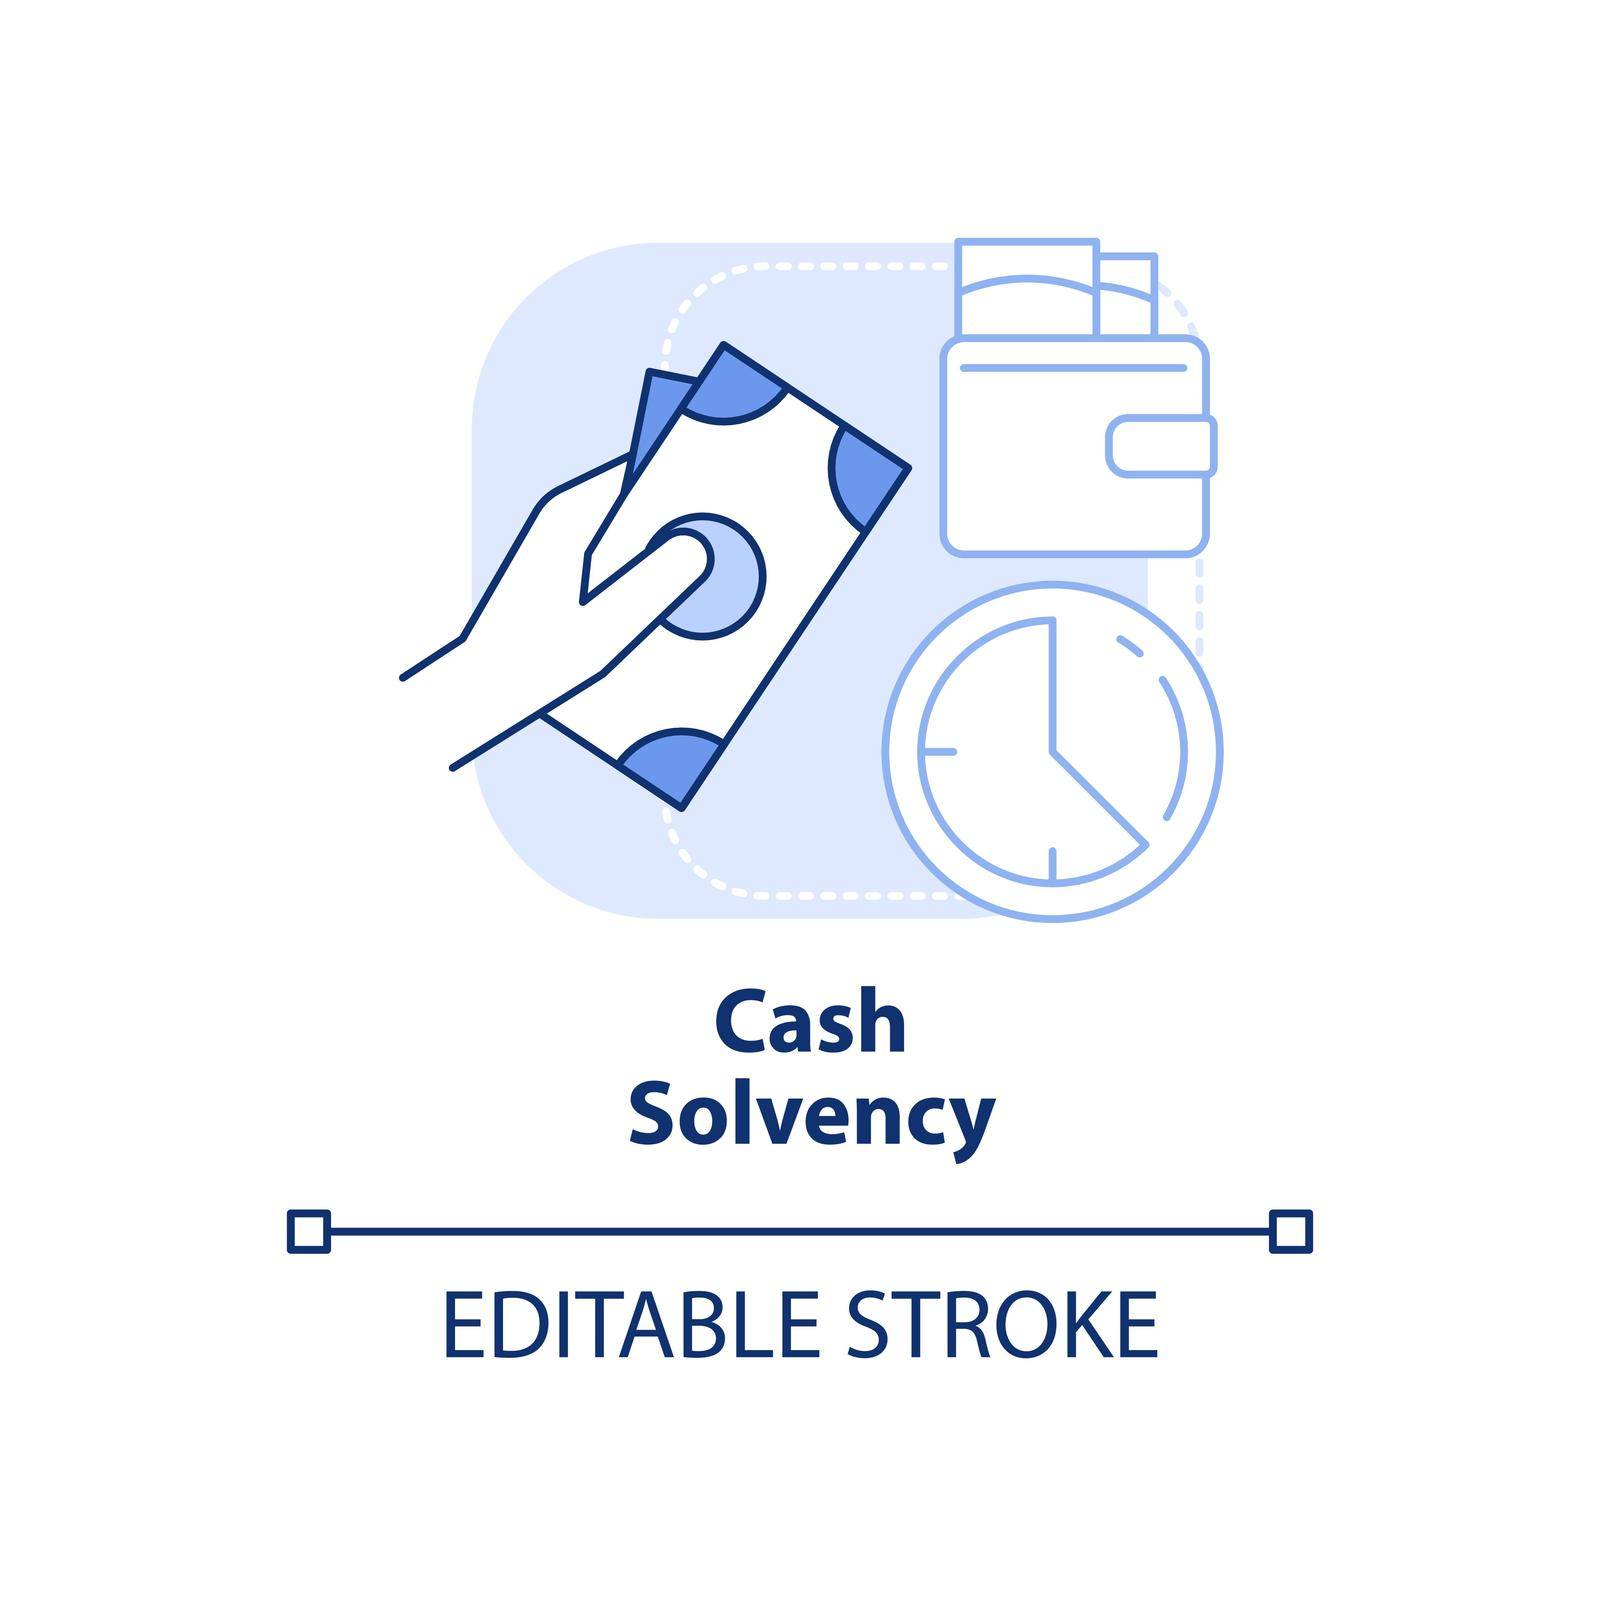 Cash solvency light blue concept icon by bsd